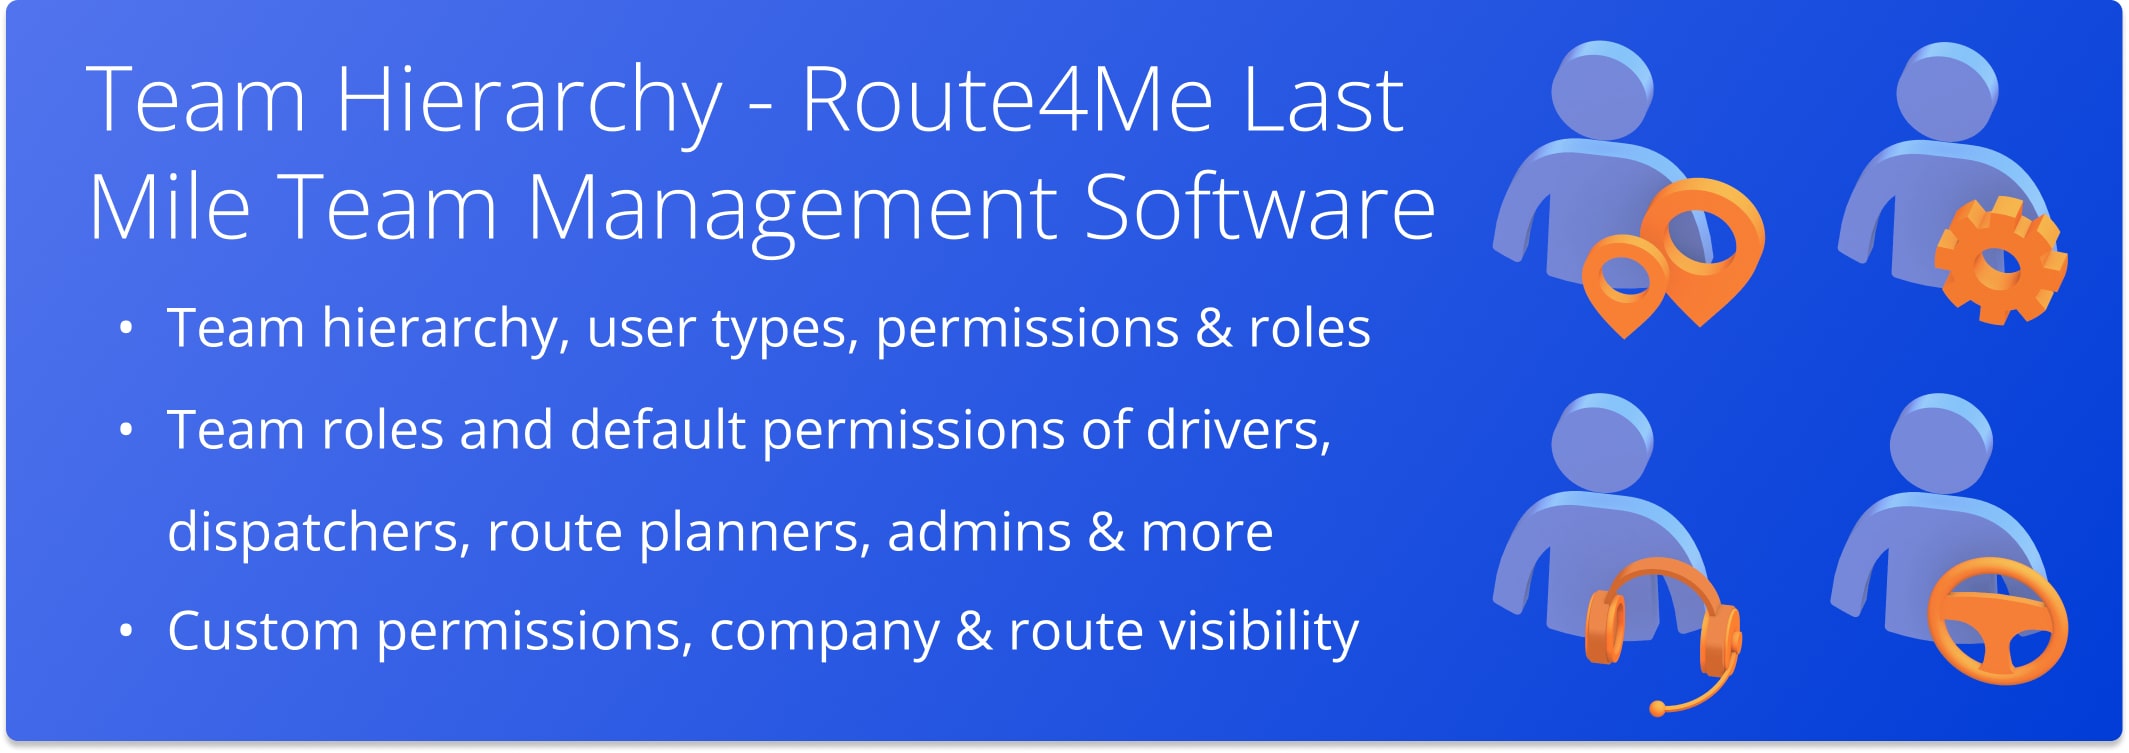 Route4Me Team Hierarchy, user roles, account-level permissions, company visibility by team role